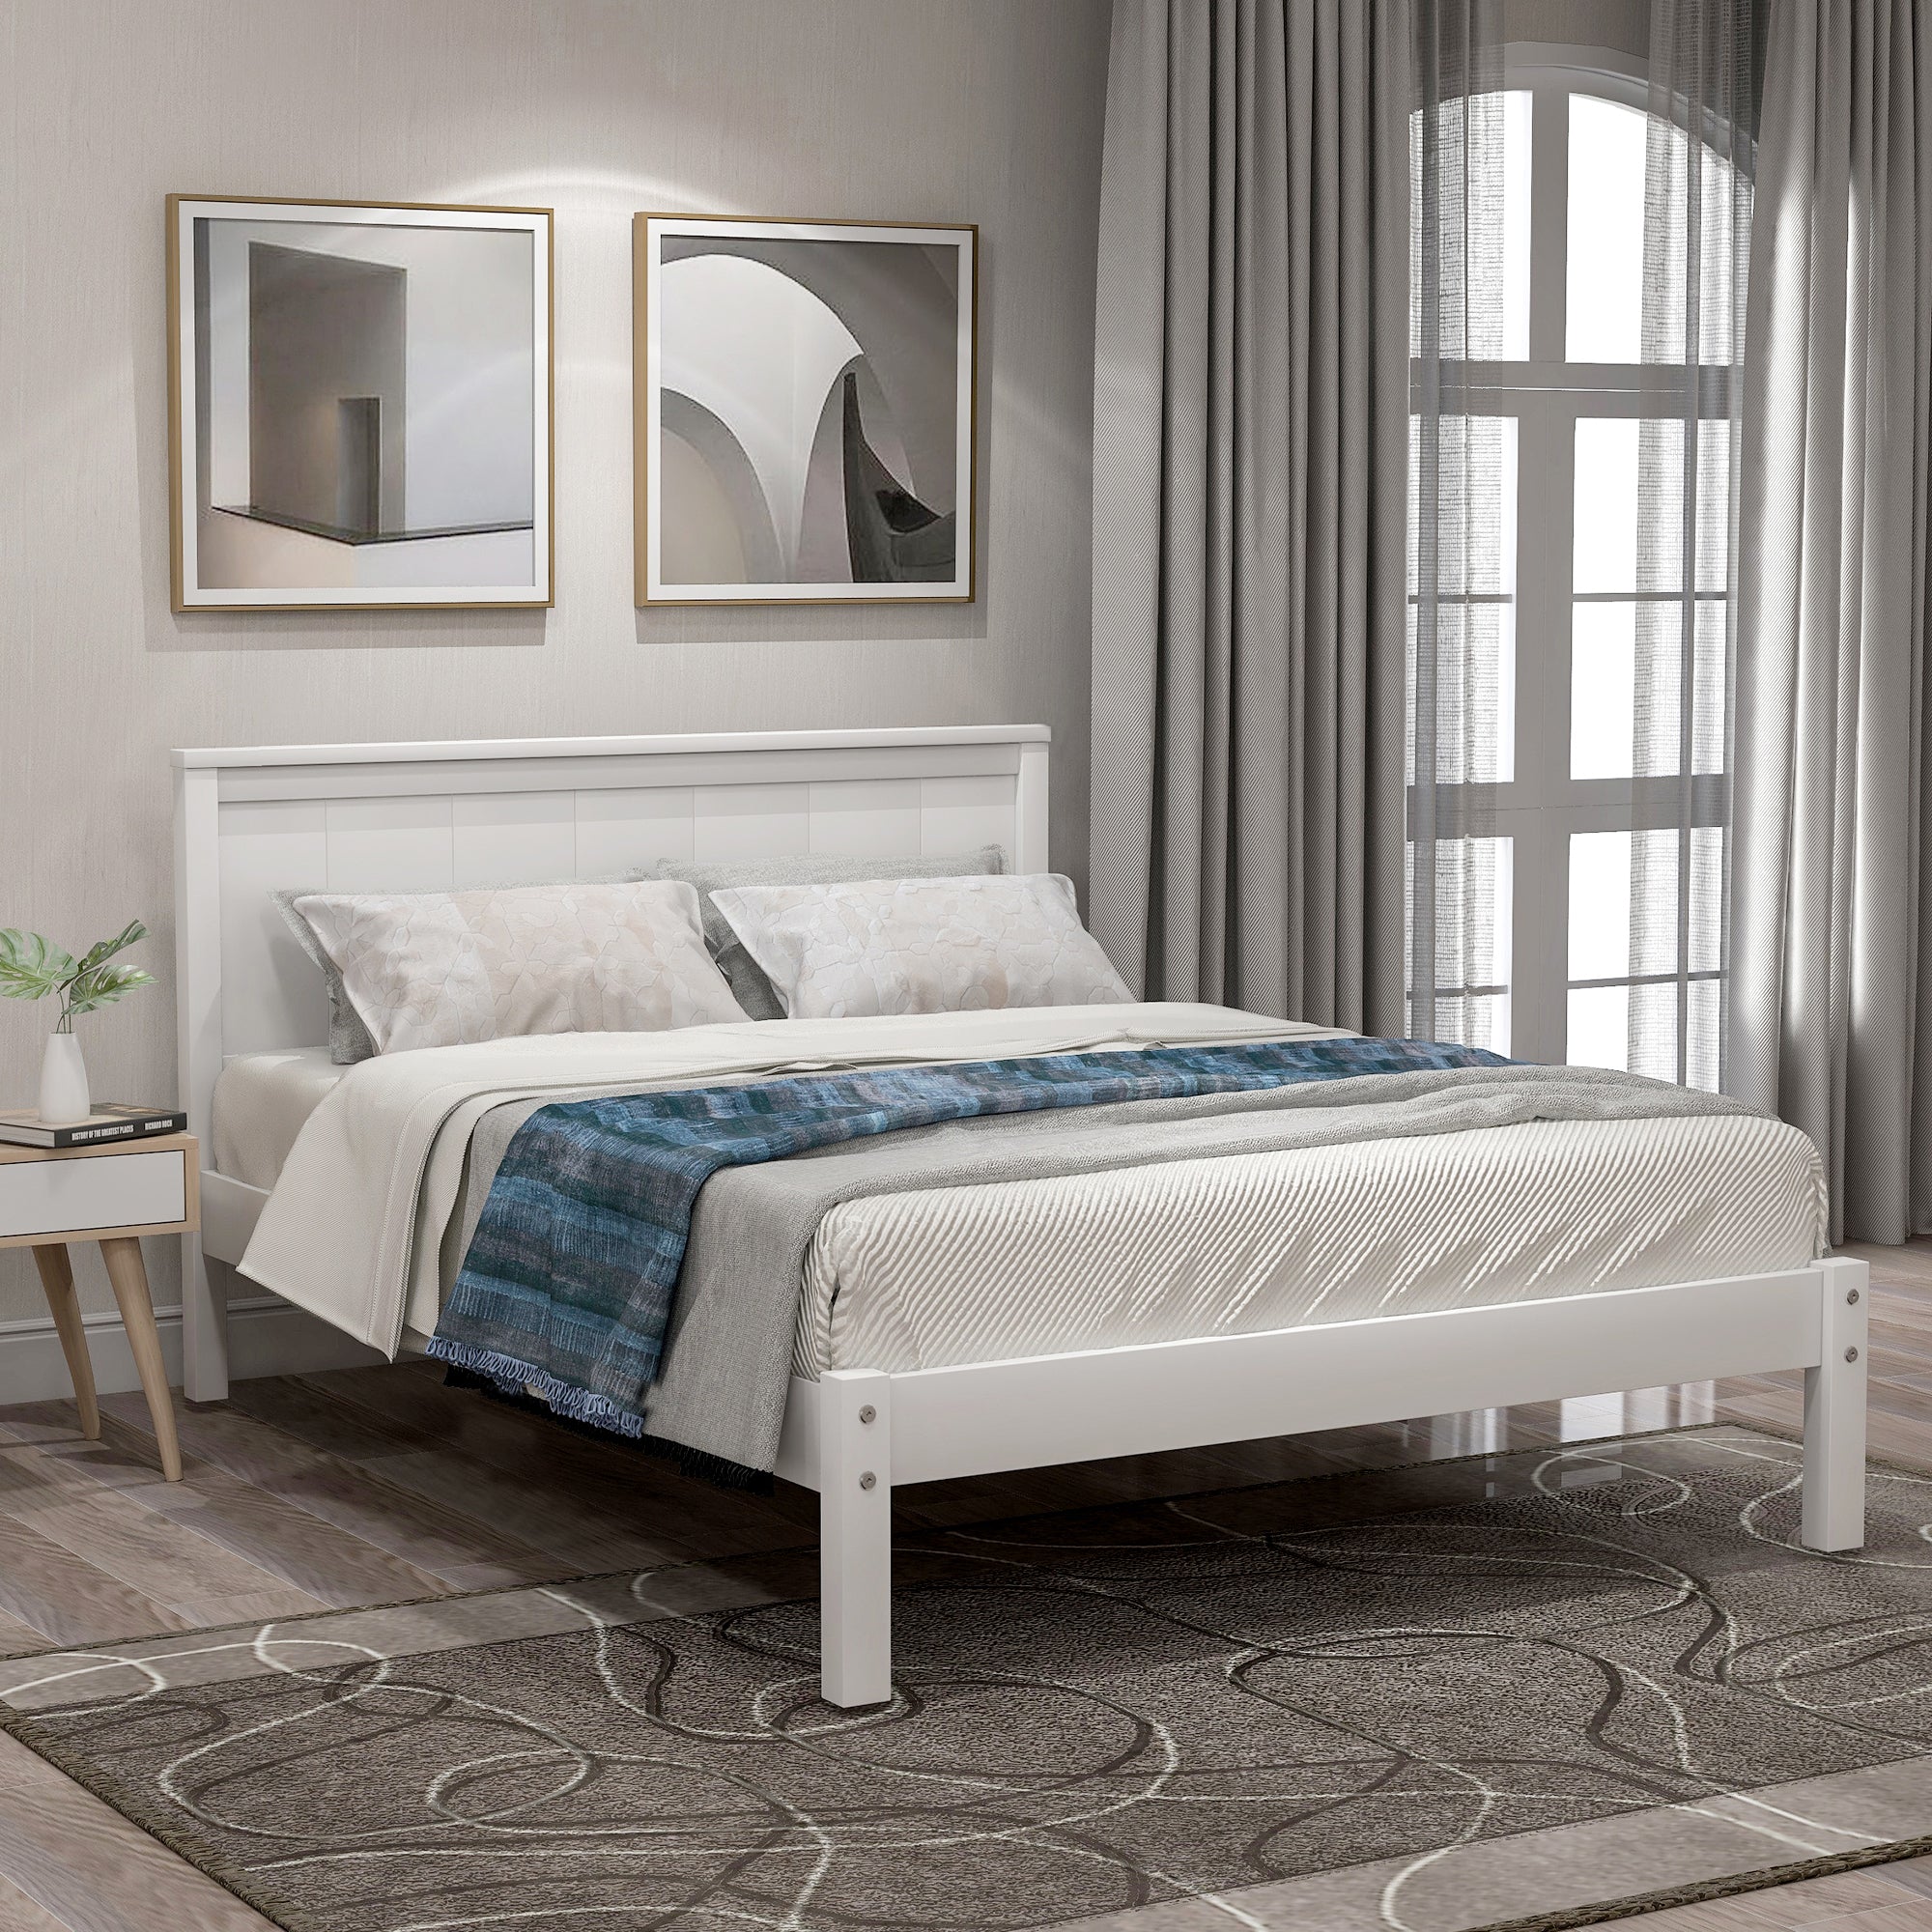 Platform Bed Frame with Headboard | Wood Slat Support | No Box Spring Needed | Twin Size | White Finish